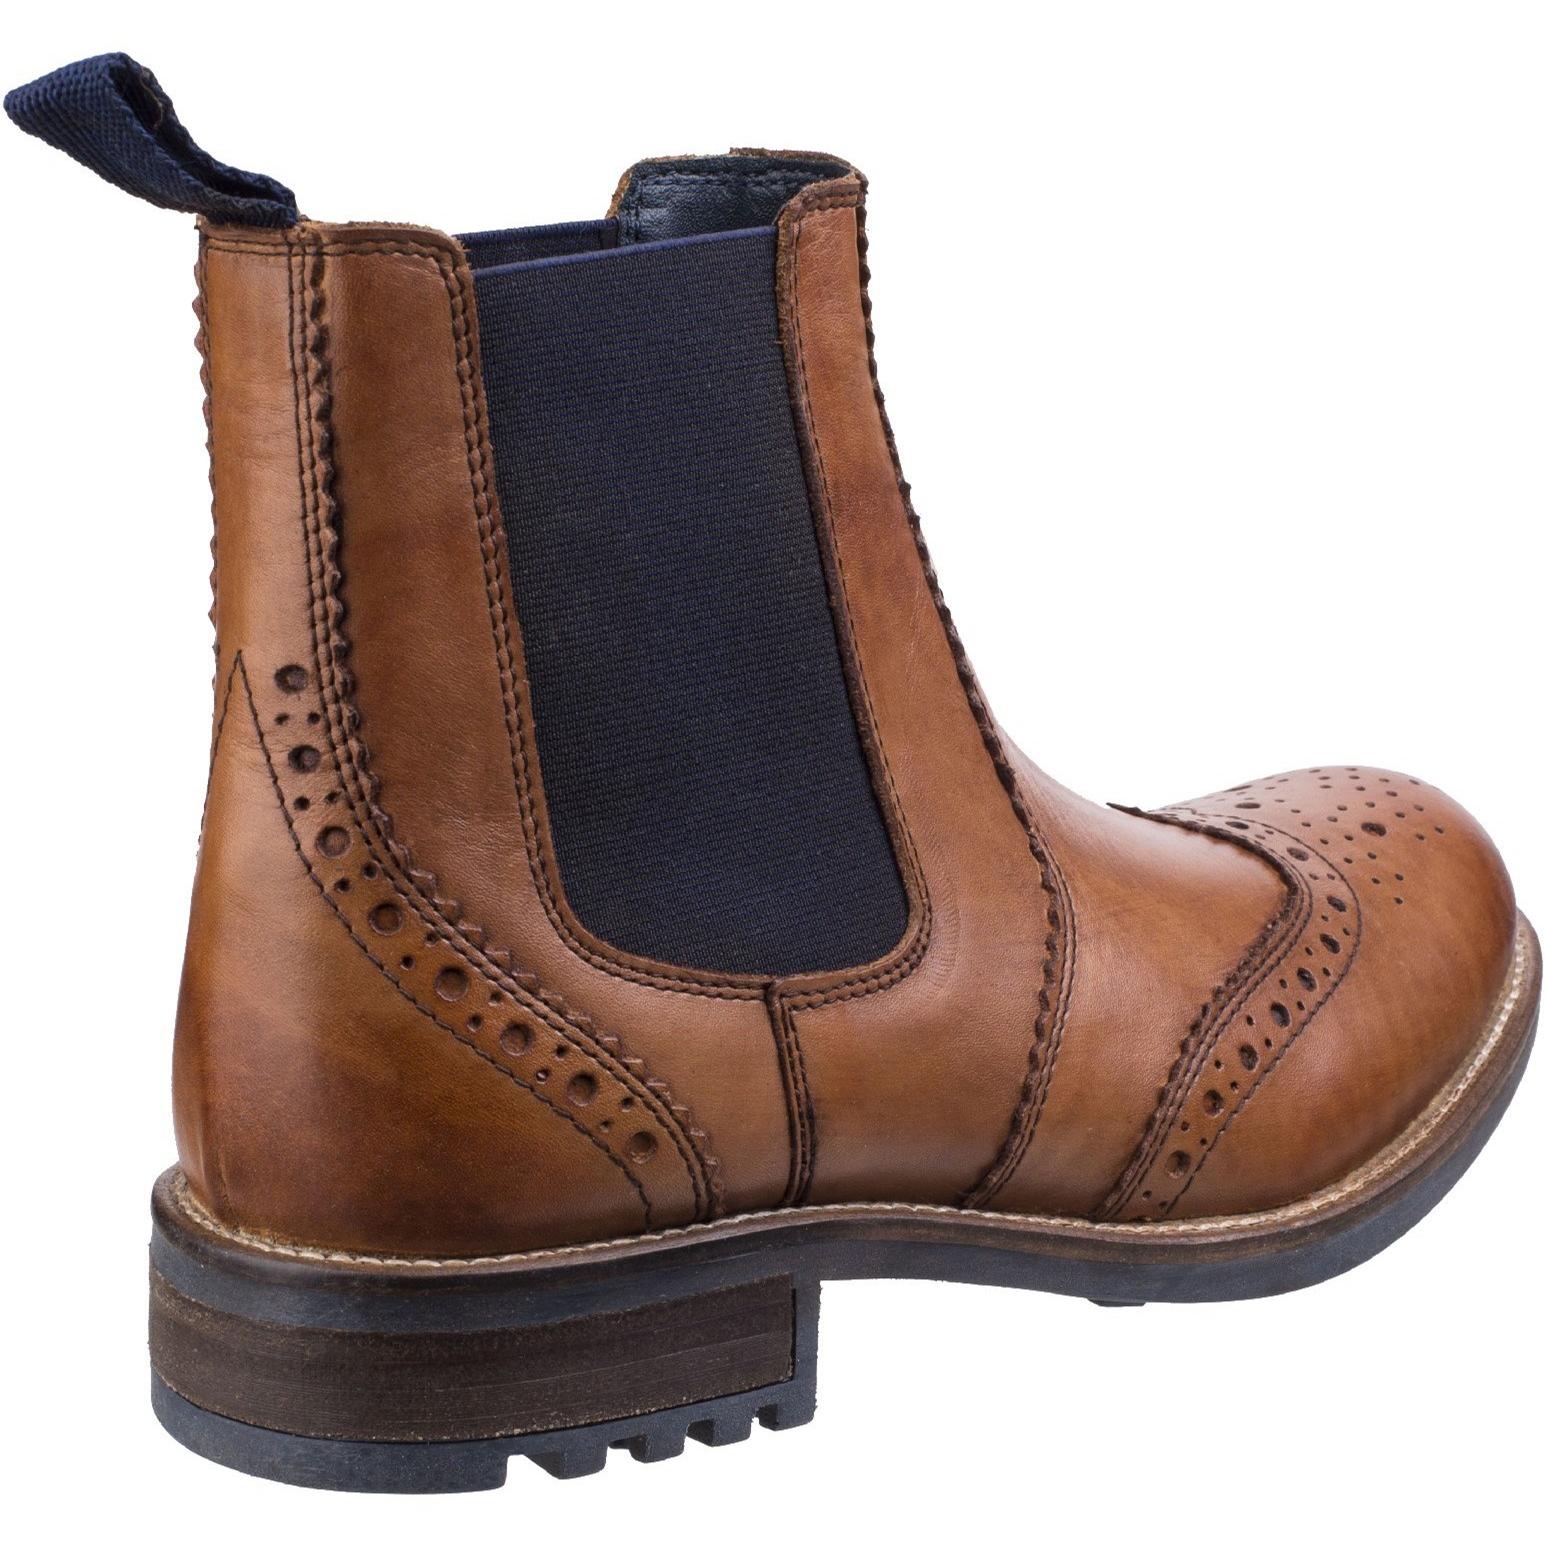 Cotswold Cirencester Chelsea Brogue Boots